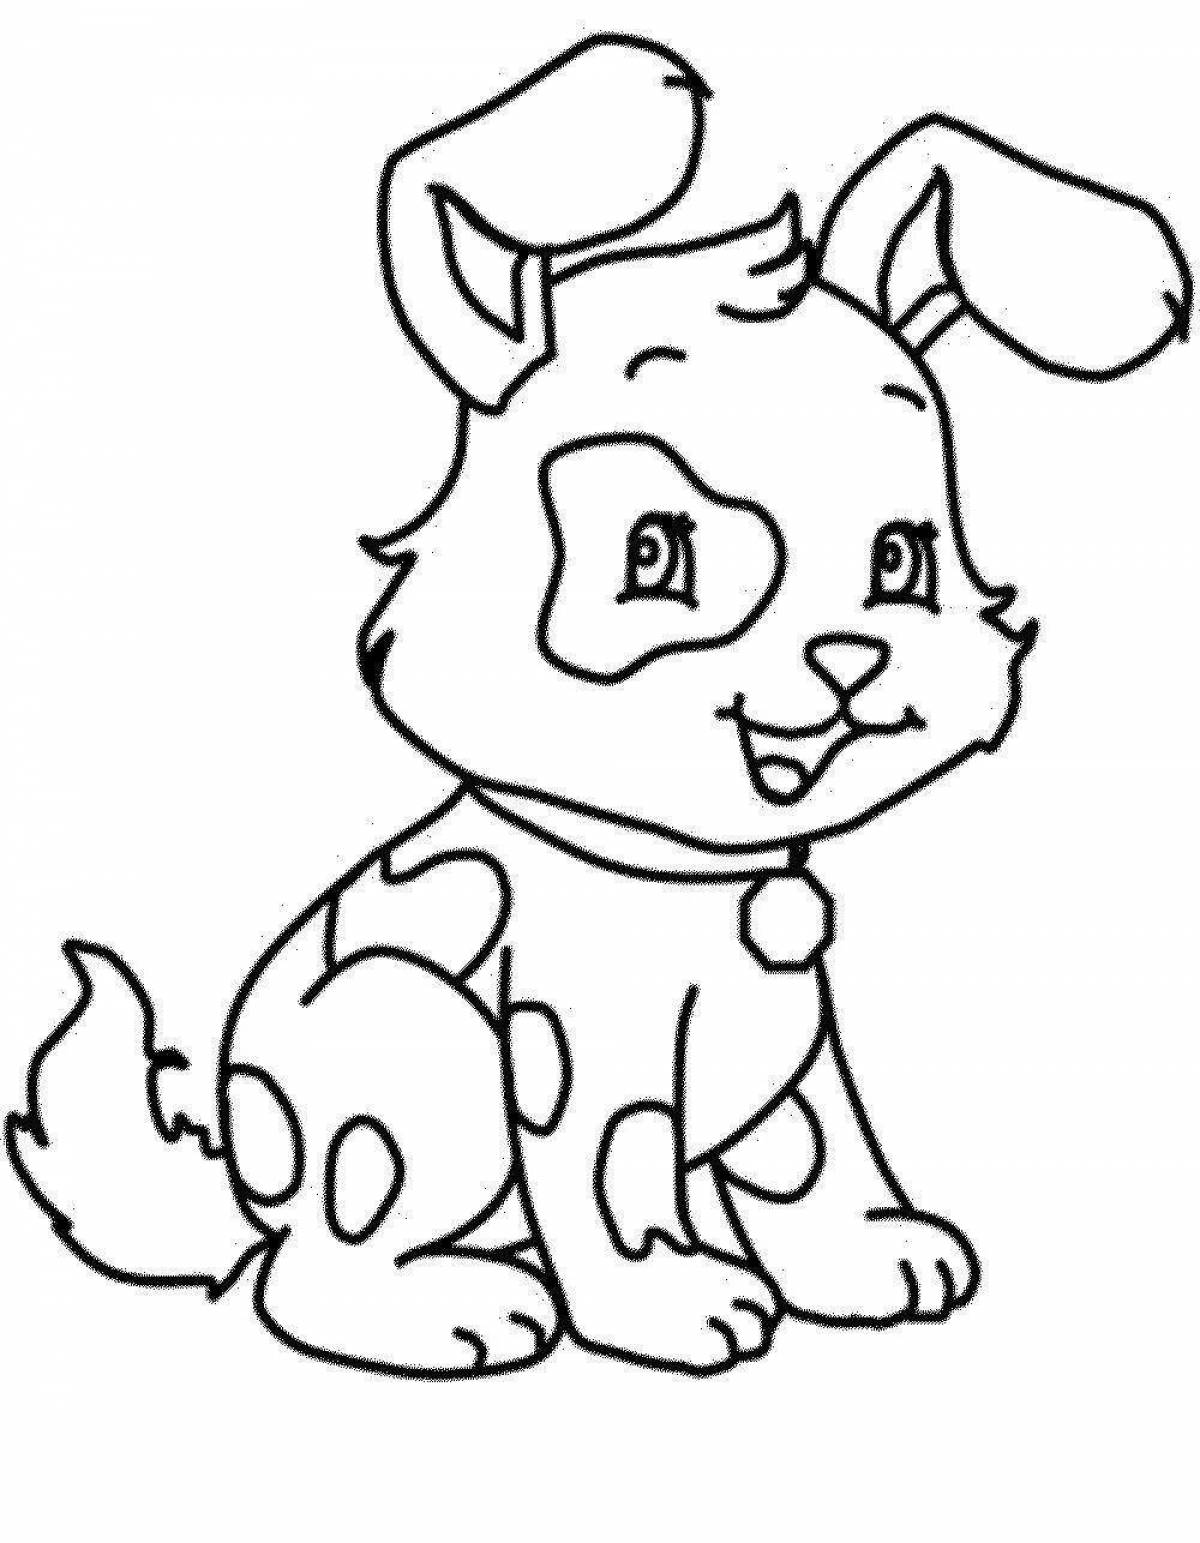 Fun coloring book animals for 7 year olds